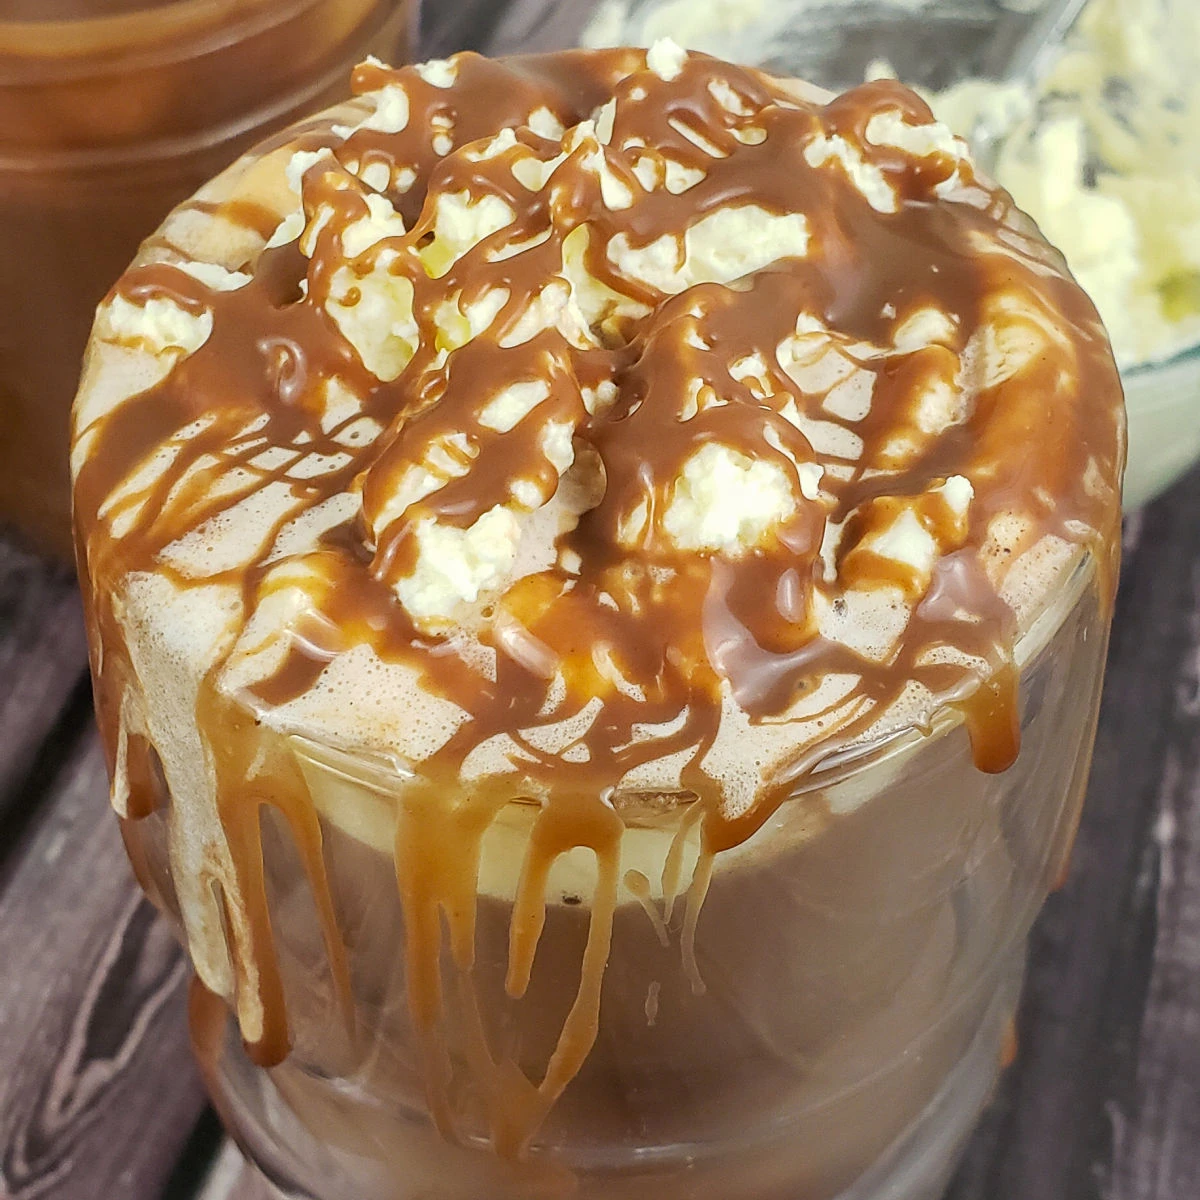 Close up of hot chocolate topped with whipped cream and caramel sauce.